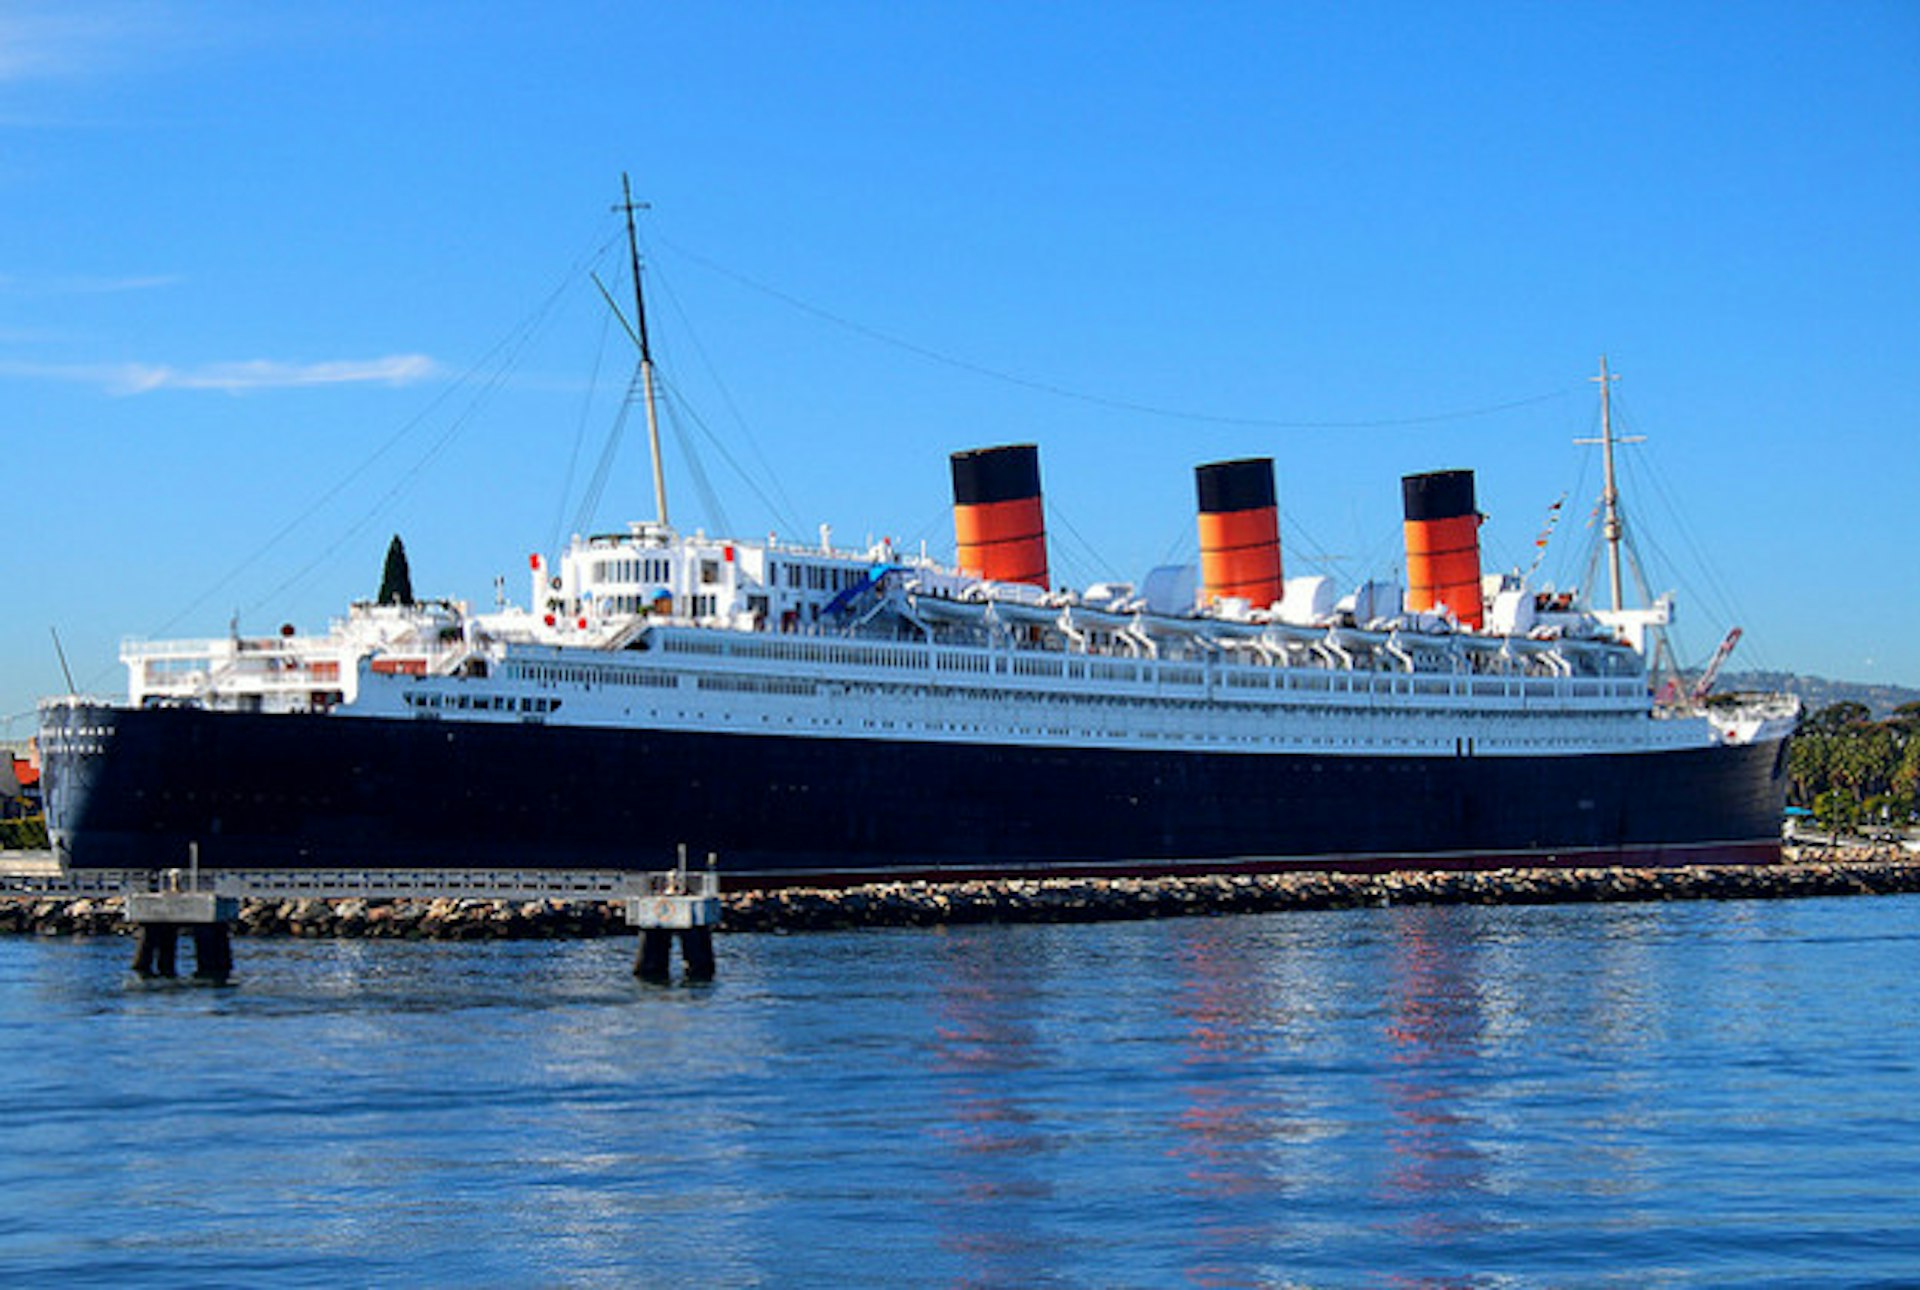 The Queen Mary.